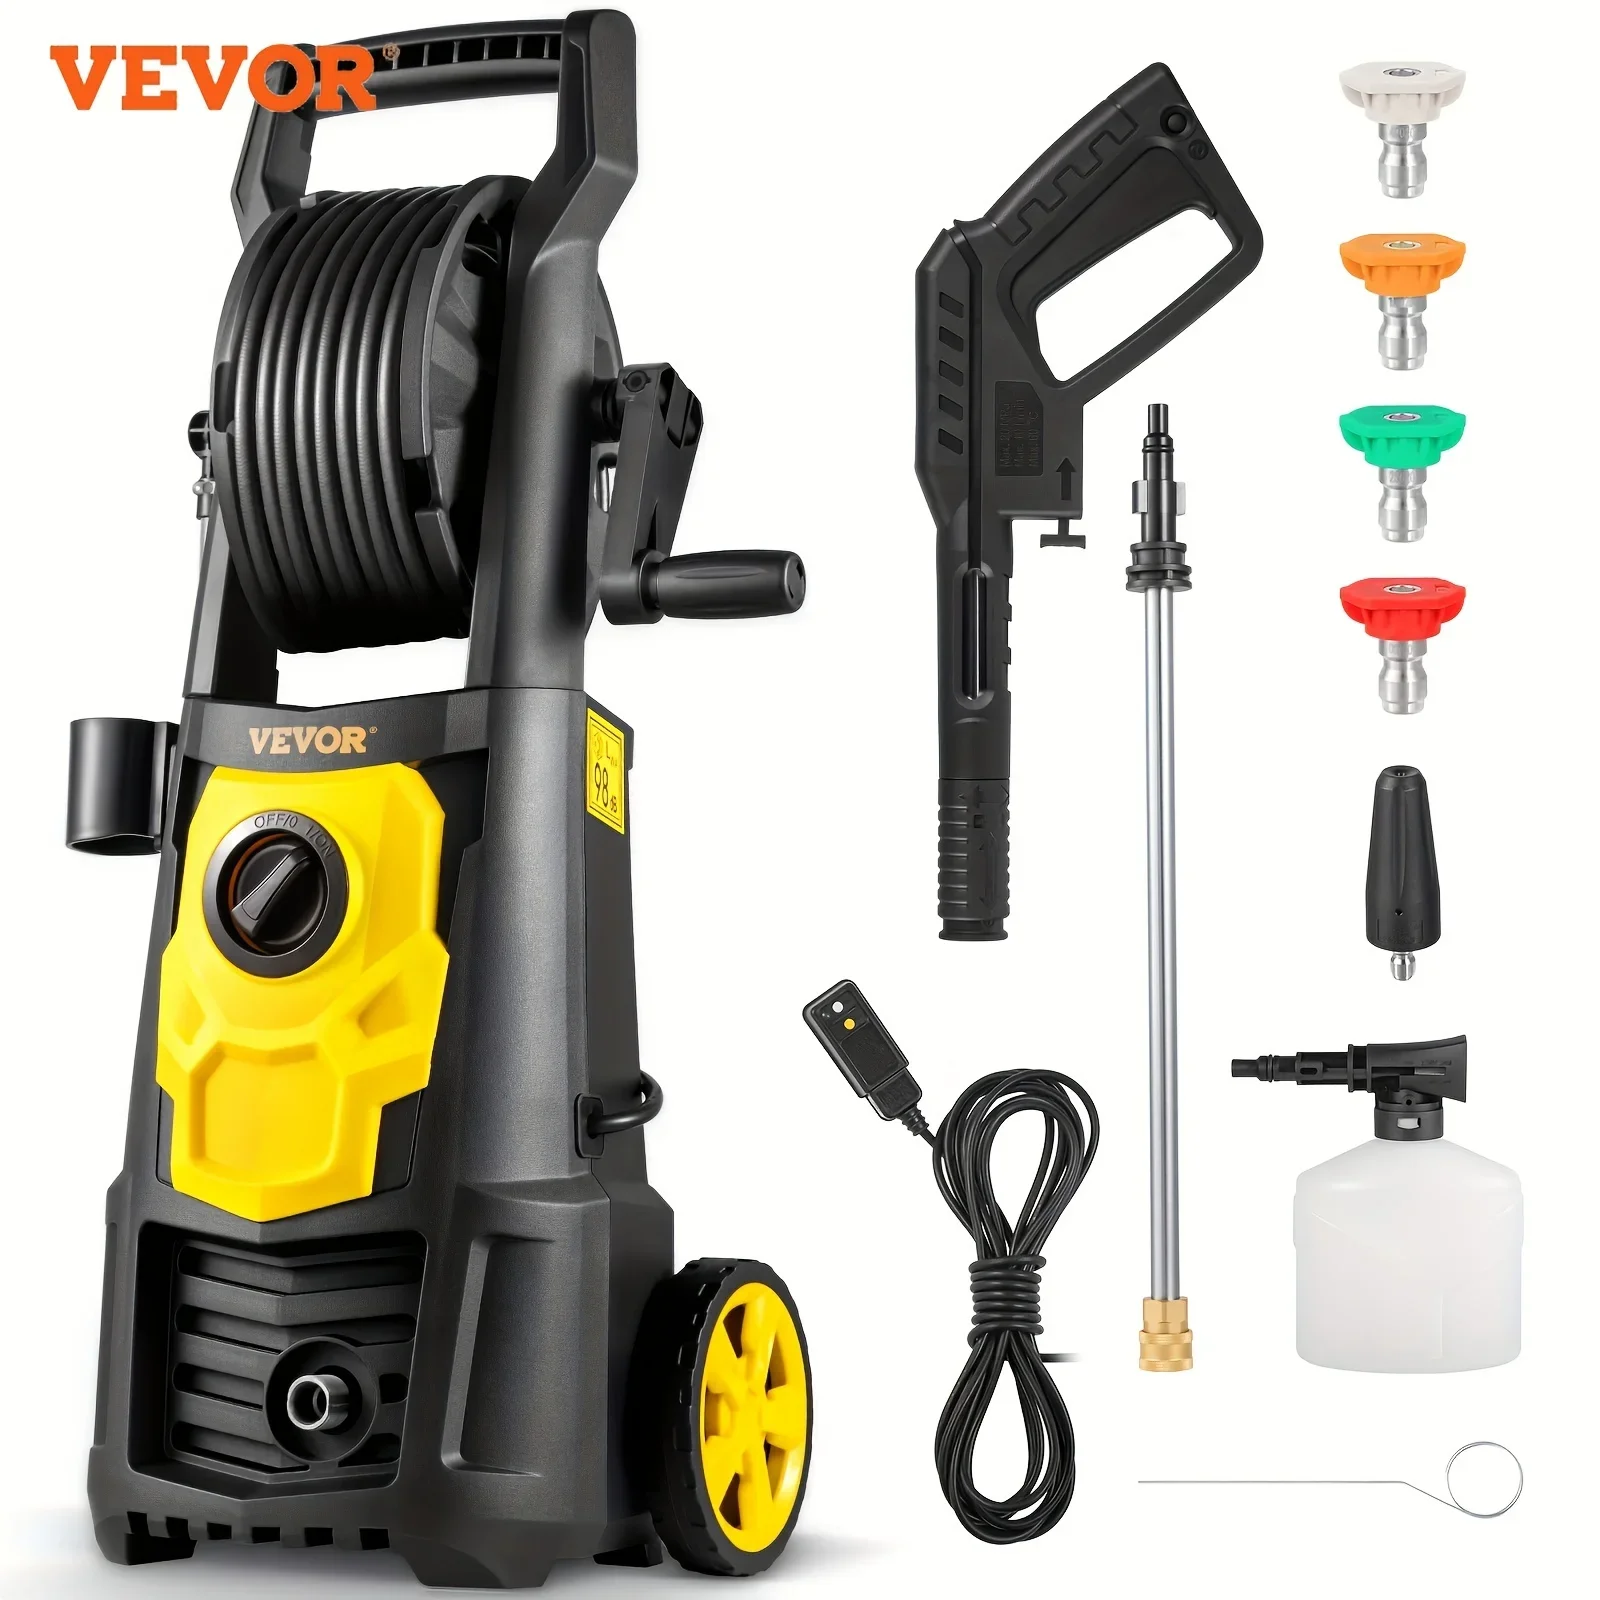 

Powerful 2000 PSI Pressure Washer with Max 1.65 GPM Flow Rate, Includes 30 Ft Hose & Reel, 5 Quick Connect Nozzles, Foam Cannon